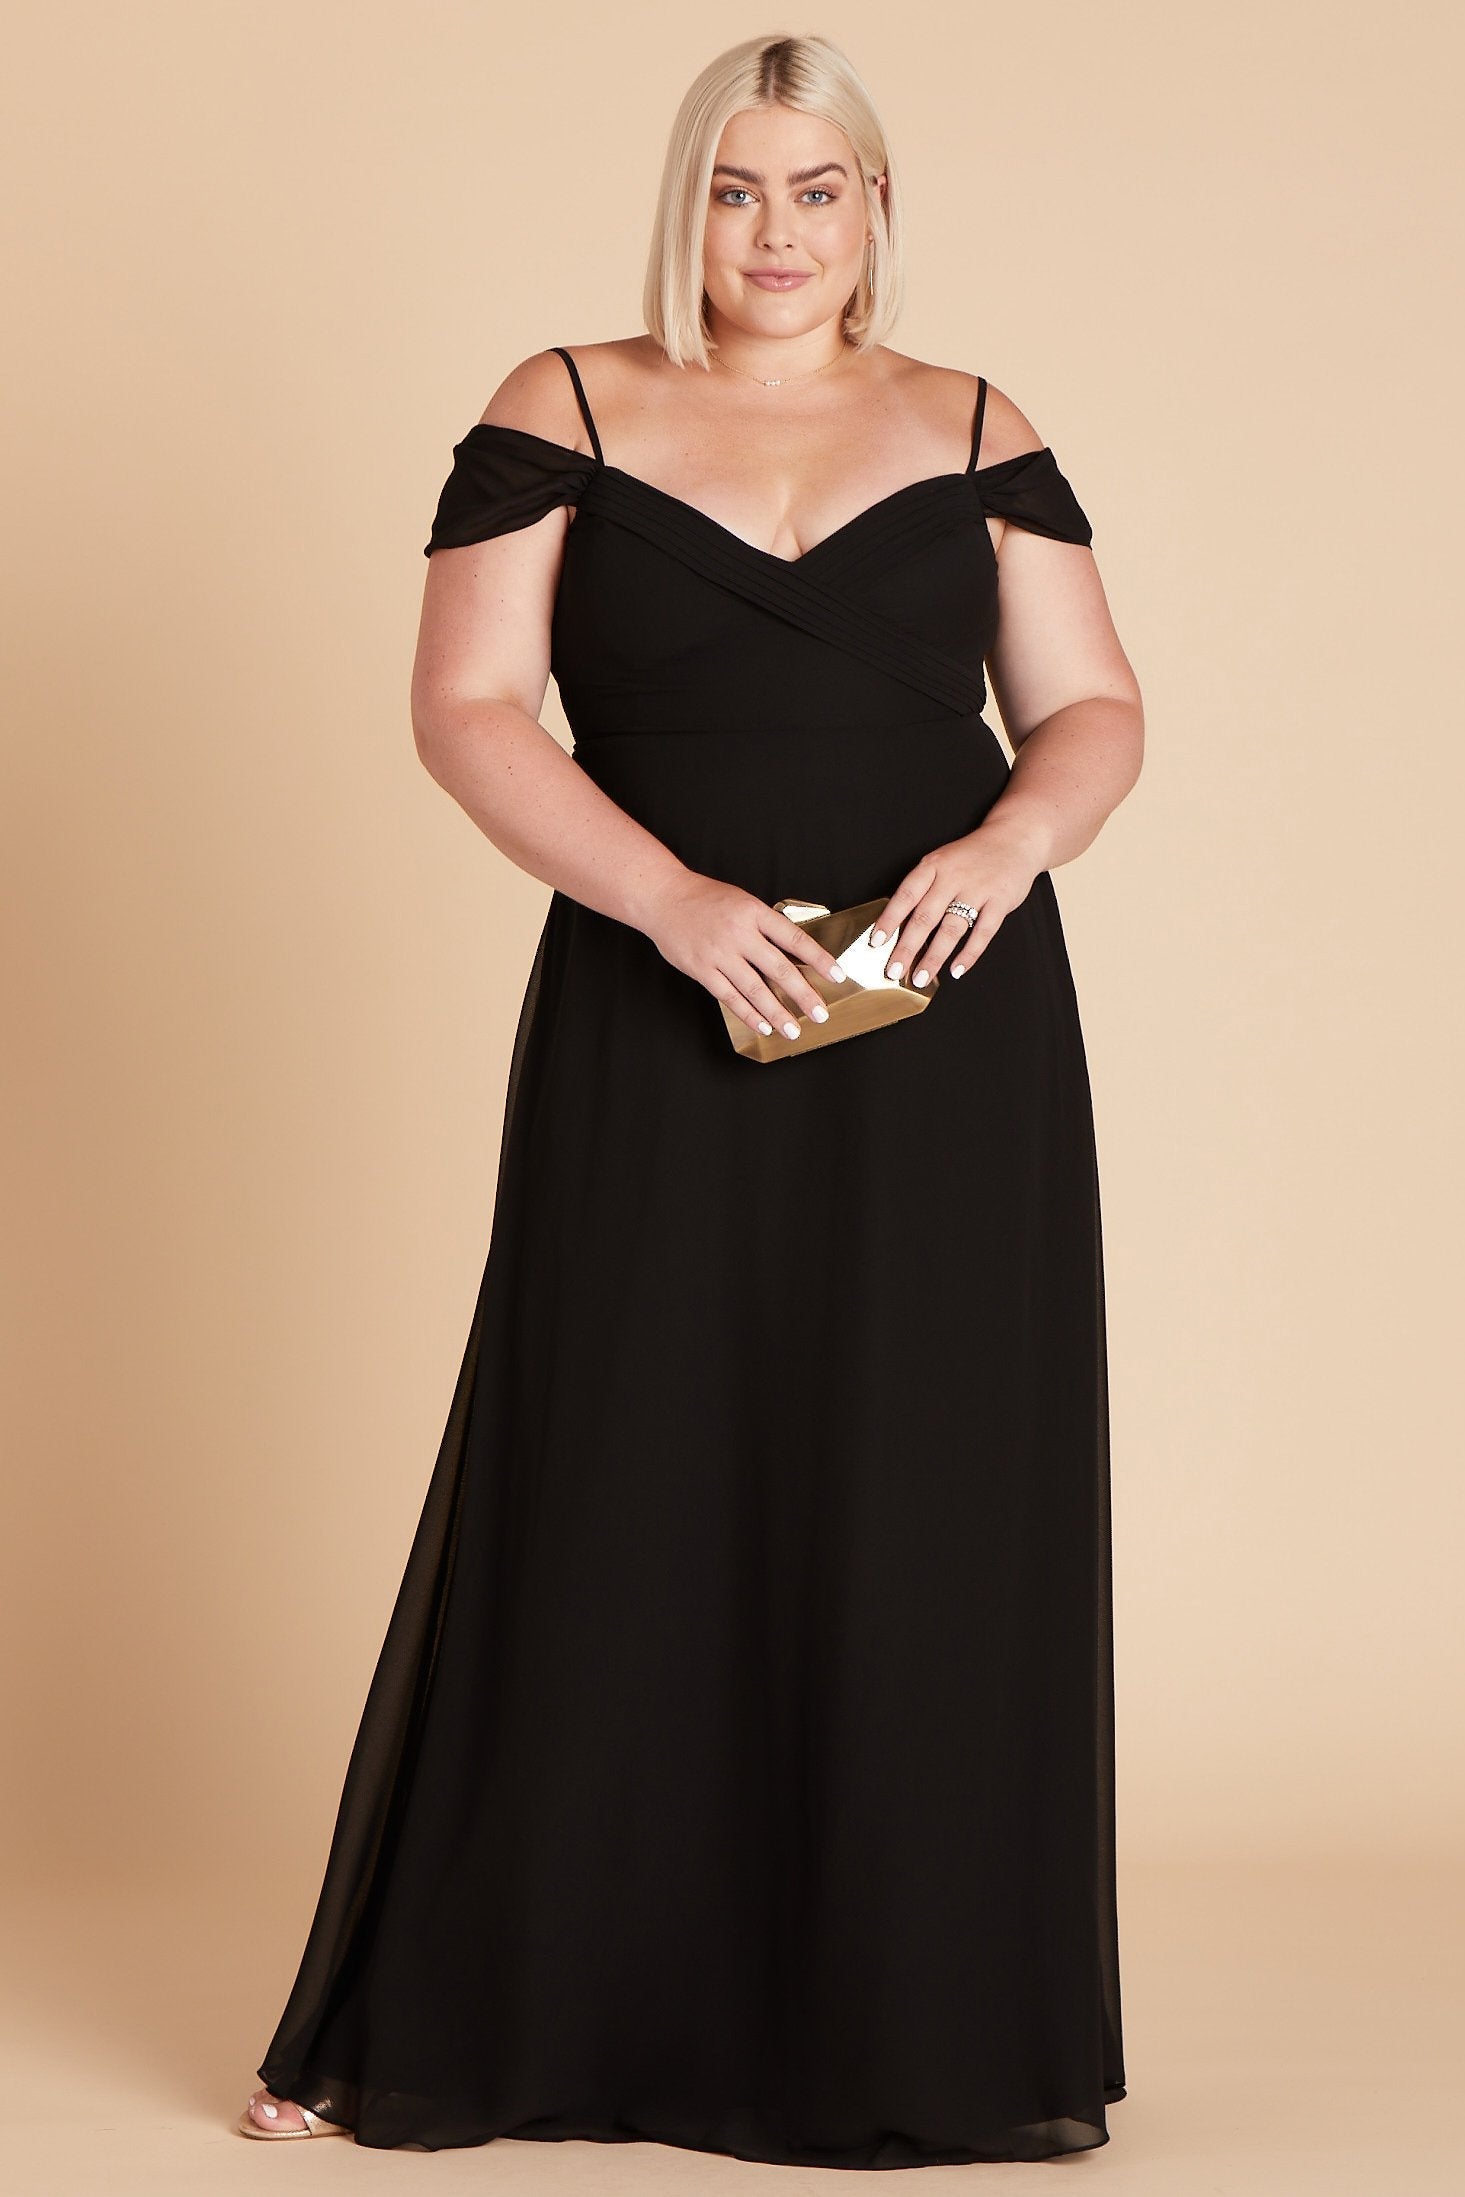 Spence convertible plus size bridesmaid dress in black chiffon by Birdy Grey, front view